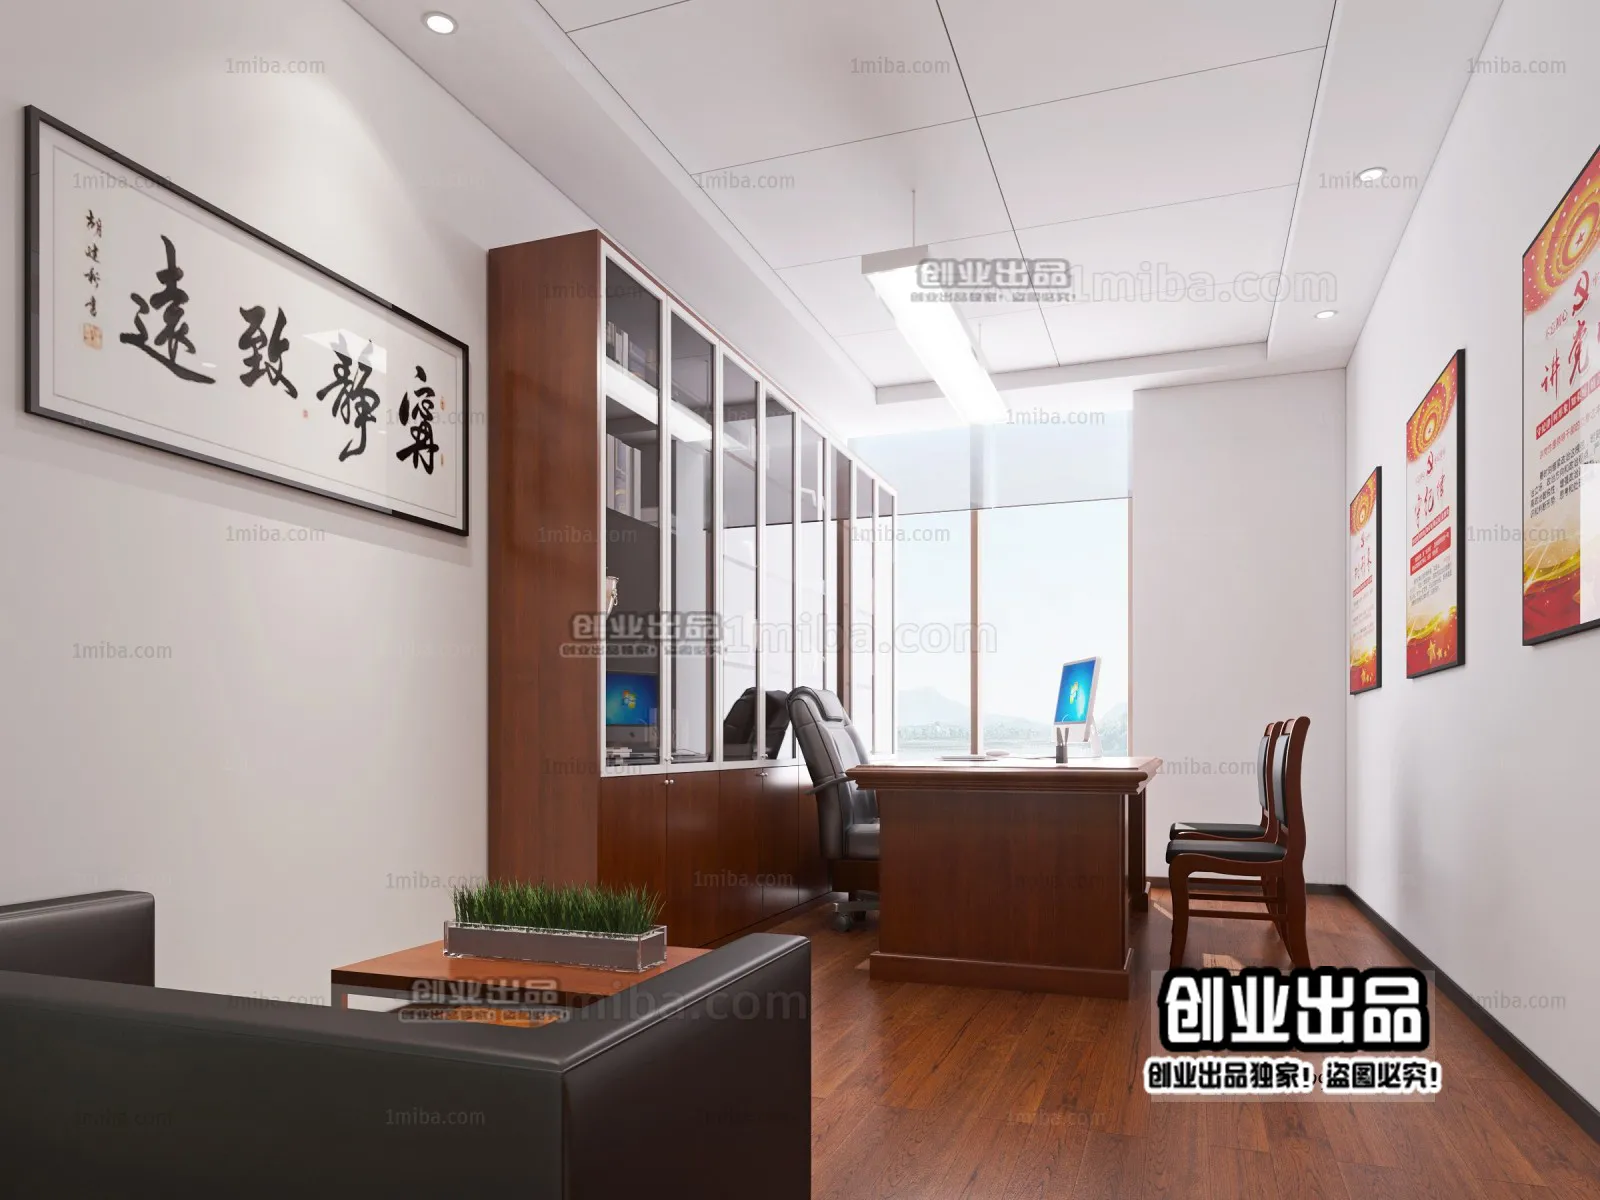 3D OFFICE INTERIOR (VRAY) – MANAGER ROOM 3D SCENES – 024